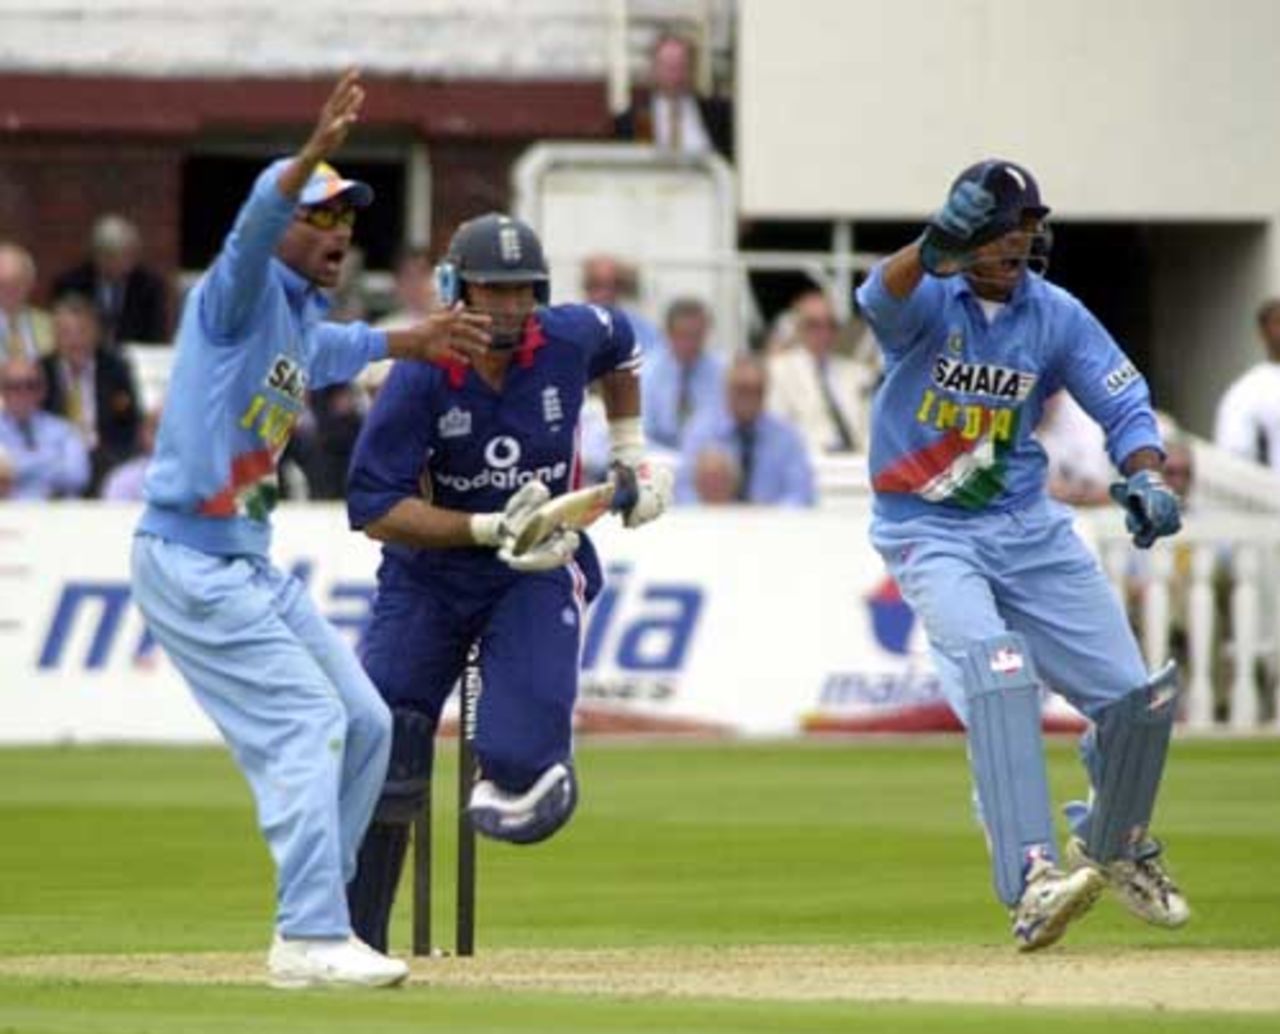 Kaif and Dravid appeal for leg-before against Hussain who scampers off for a single, England v India at Lord's, June 2002